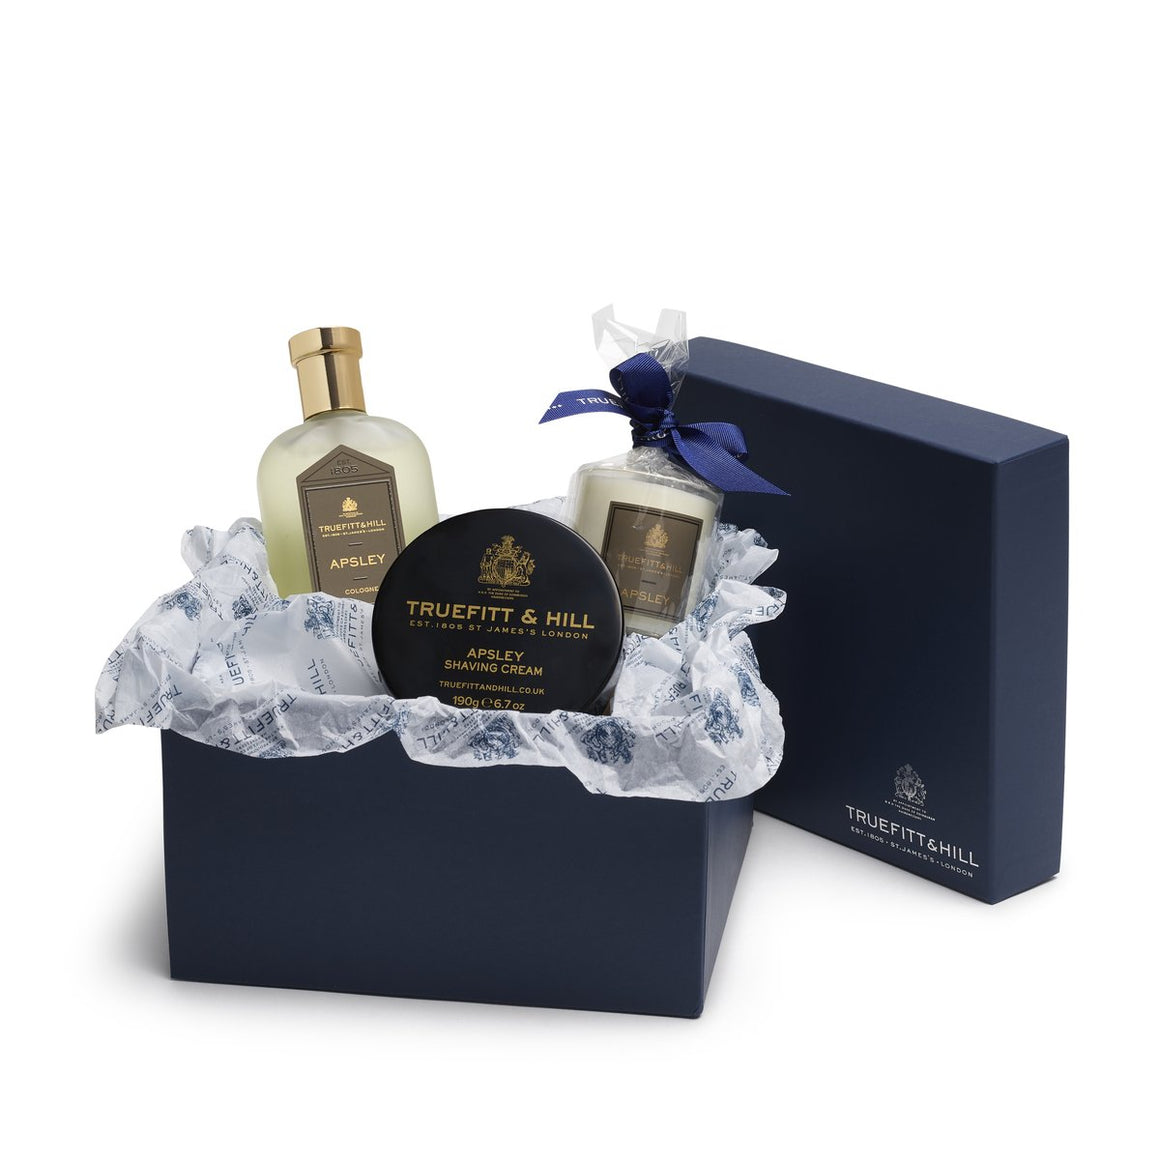 Apsley Cologne & Shaving Cream with Candle Gift Set